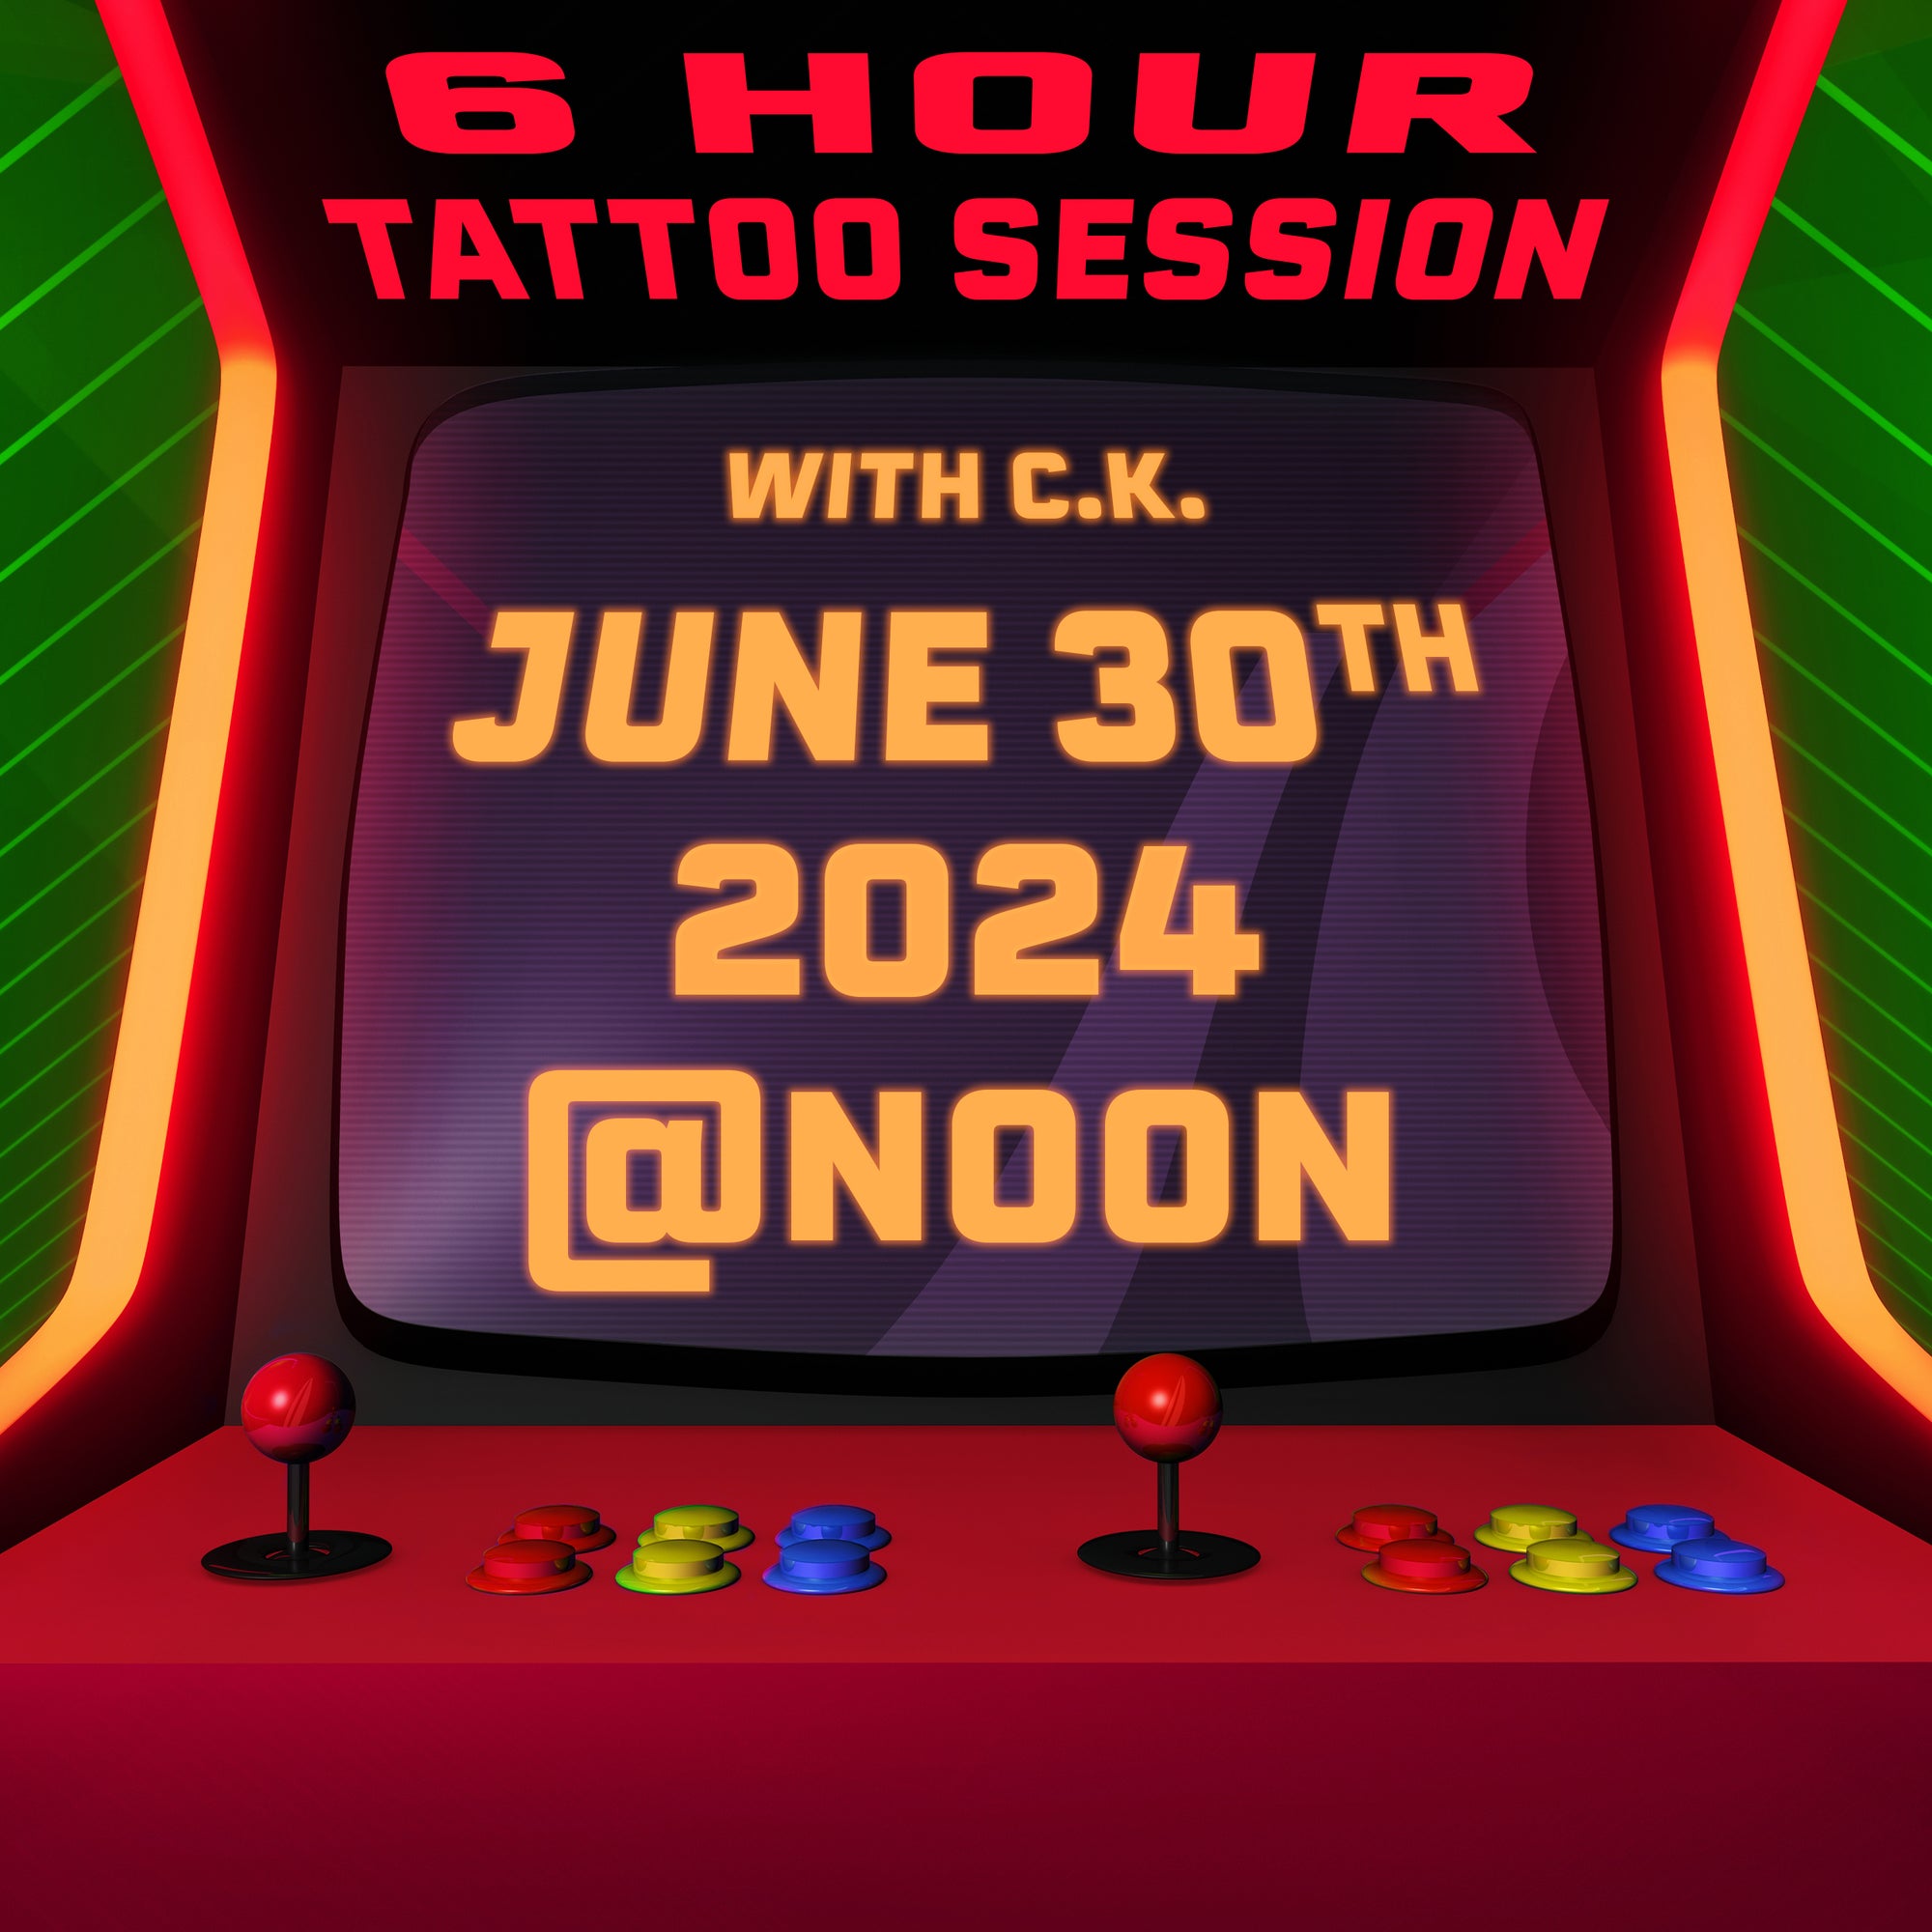 6 hour Tattoo Session with CK June 30th, 2024